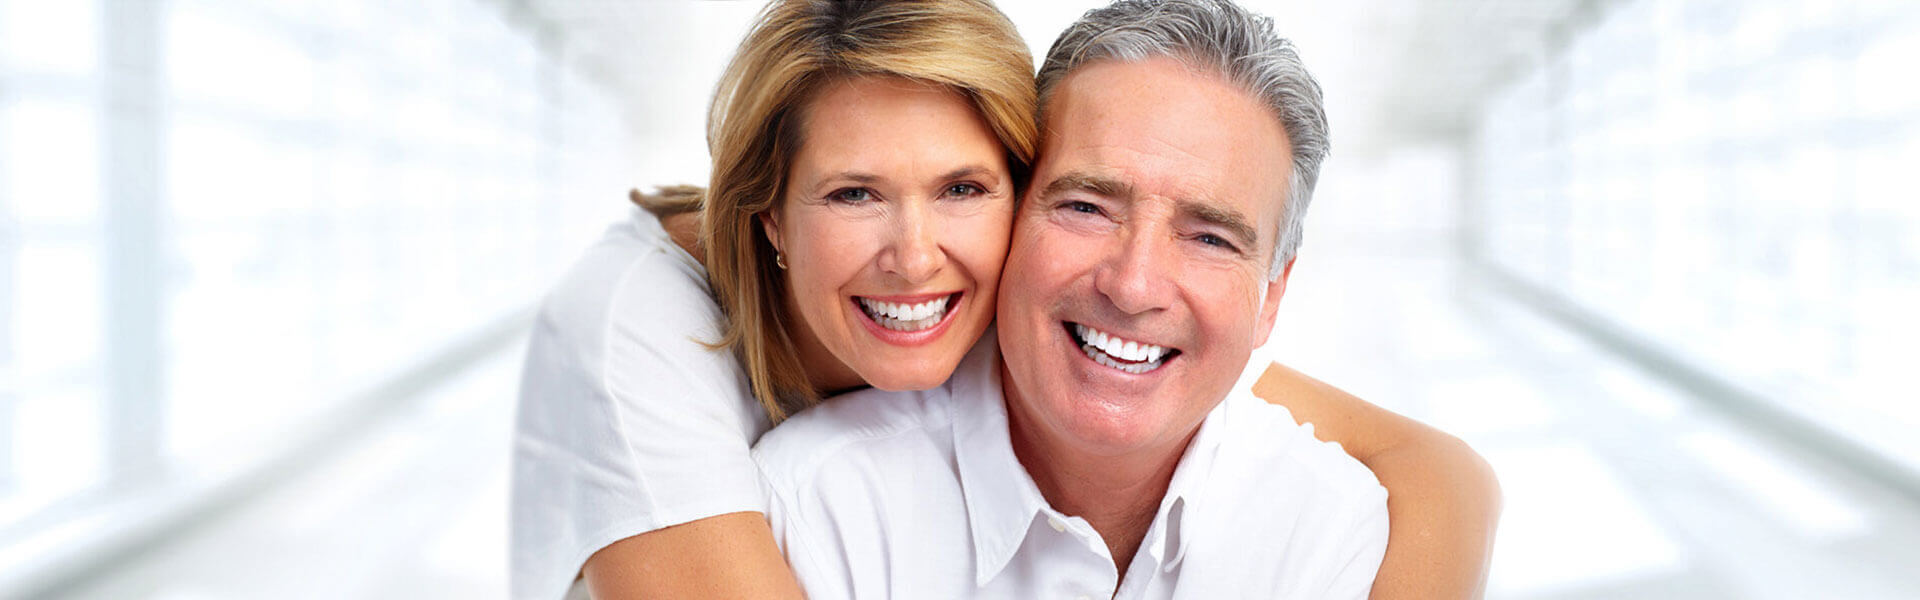 Dental Exams and Cleanings in Mississauga, ON